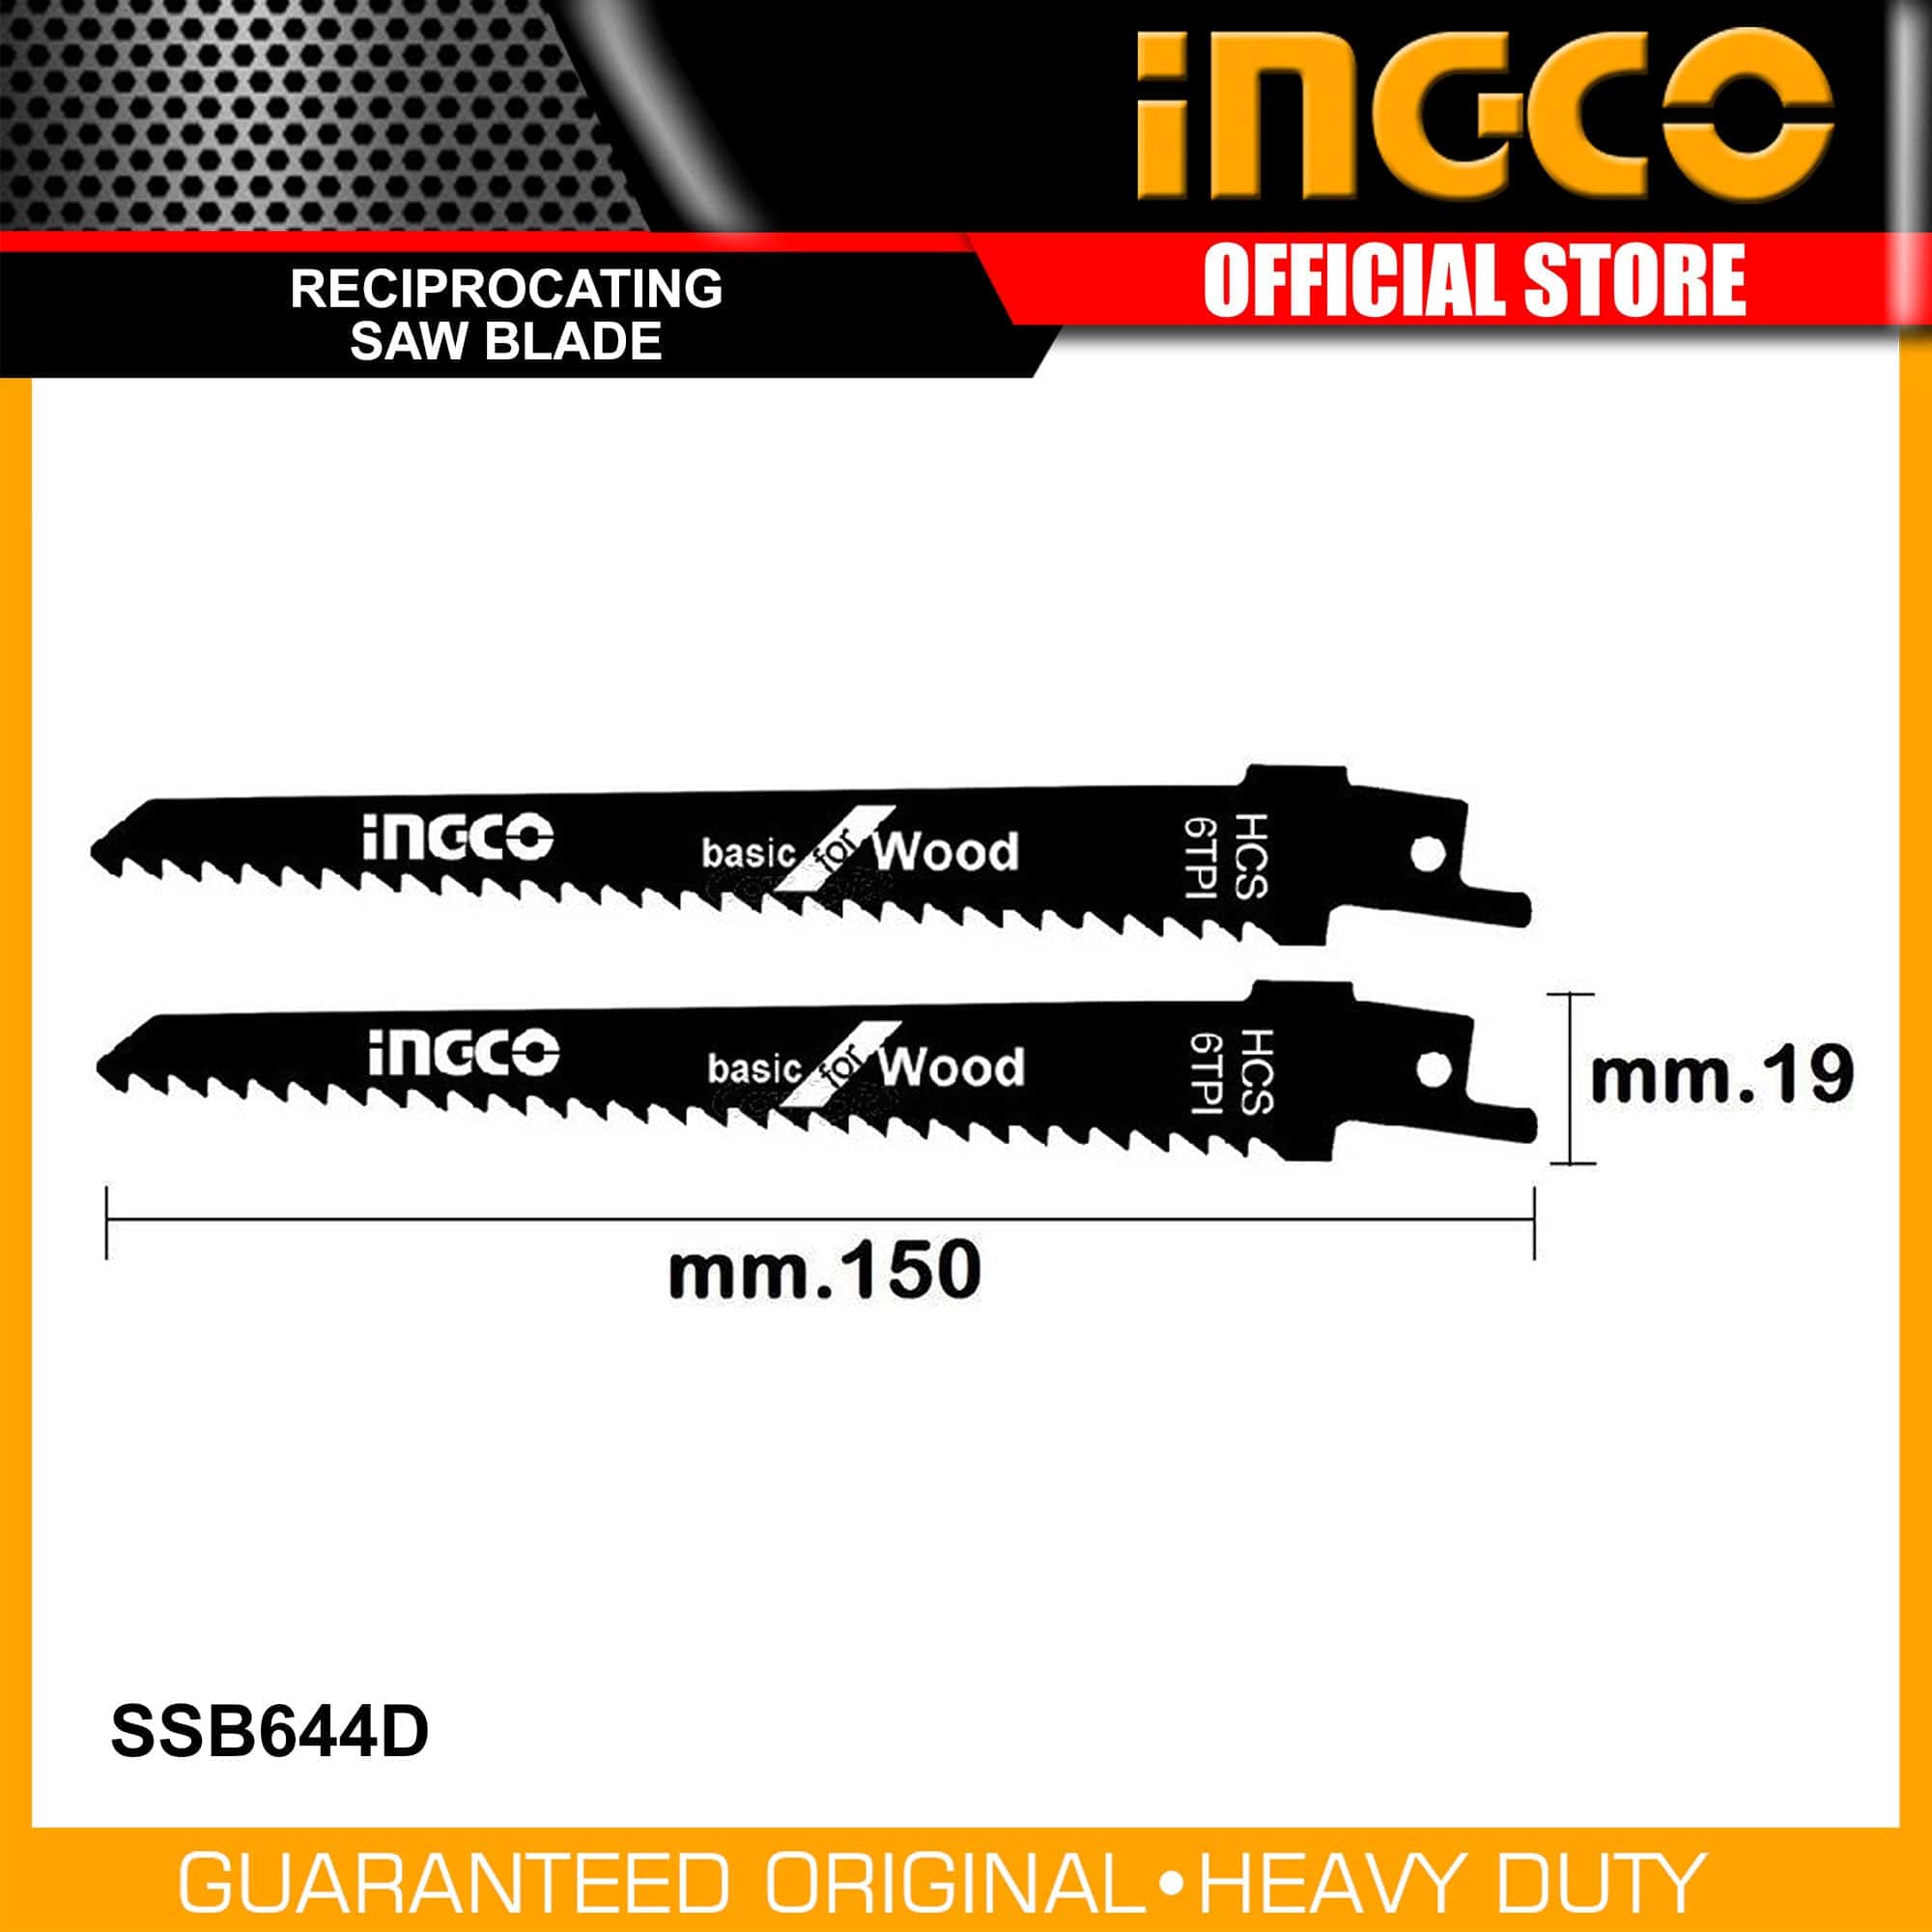 Ingco Reciprocating Saw Blade for Wood - SSB644D | Buy Online in Accra, Ghana - Supply Master Saw Blades Buy Tools hardware Building materials